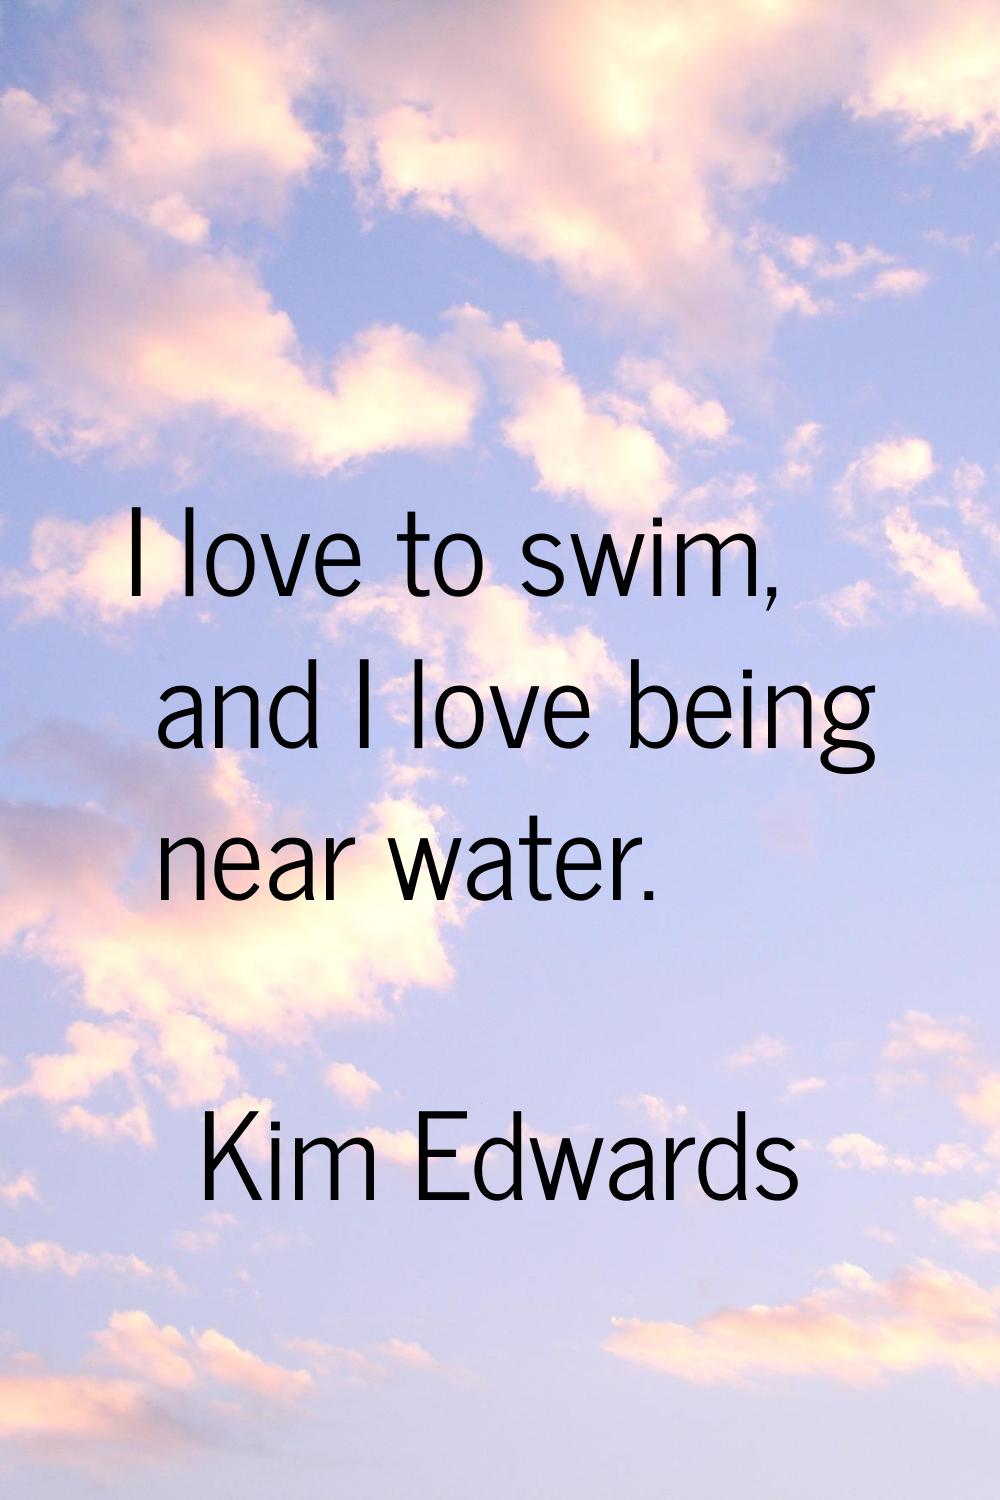 I love to swim, and I love being near water.